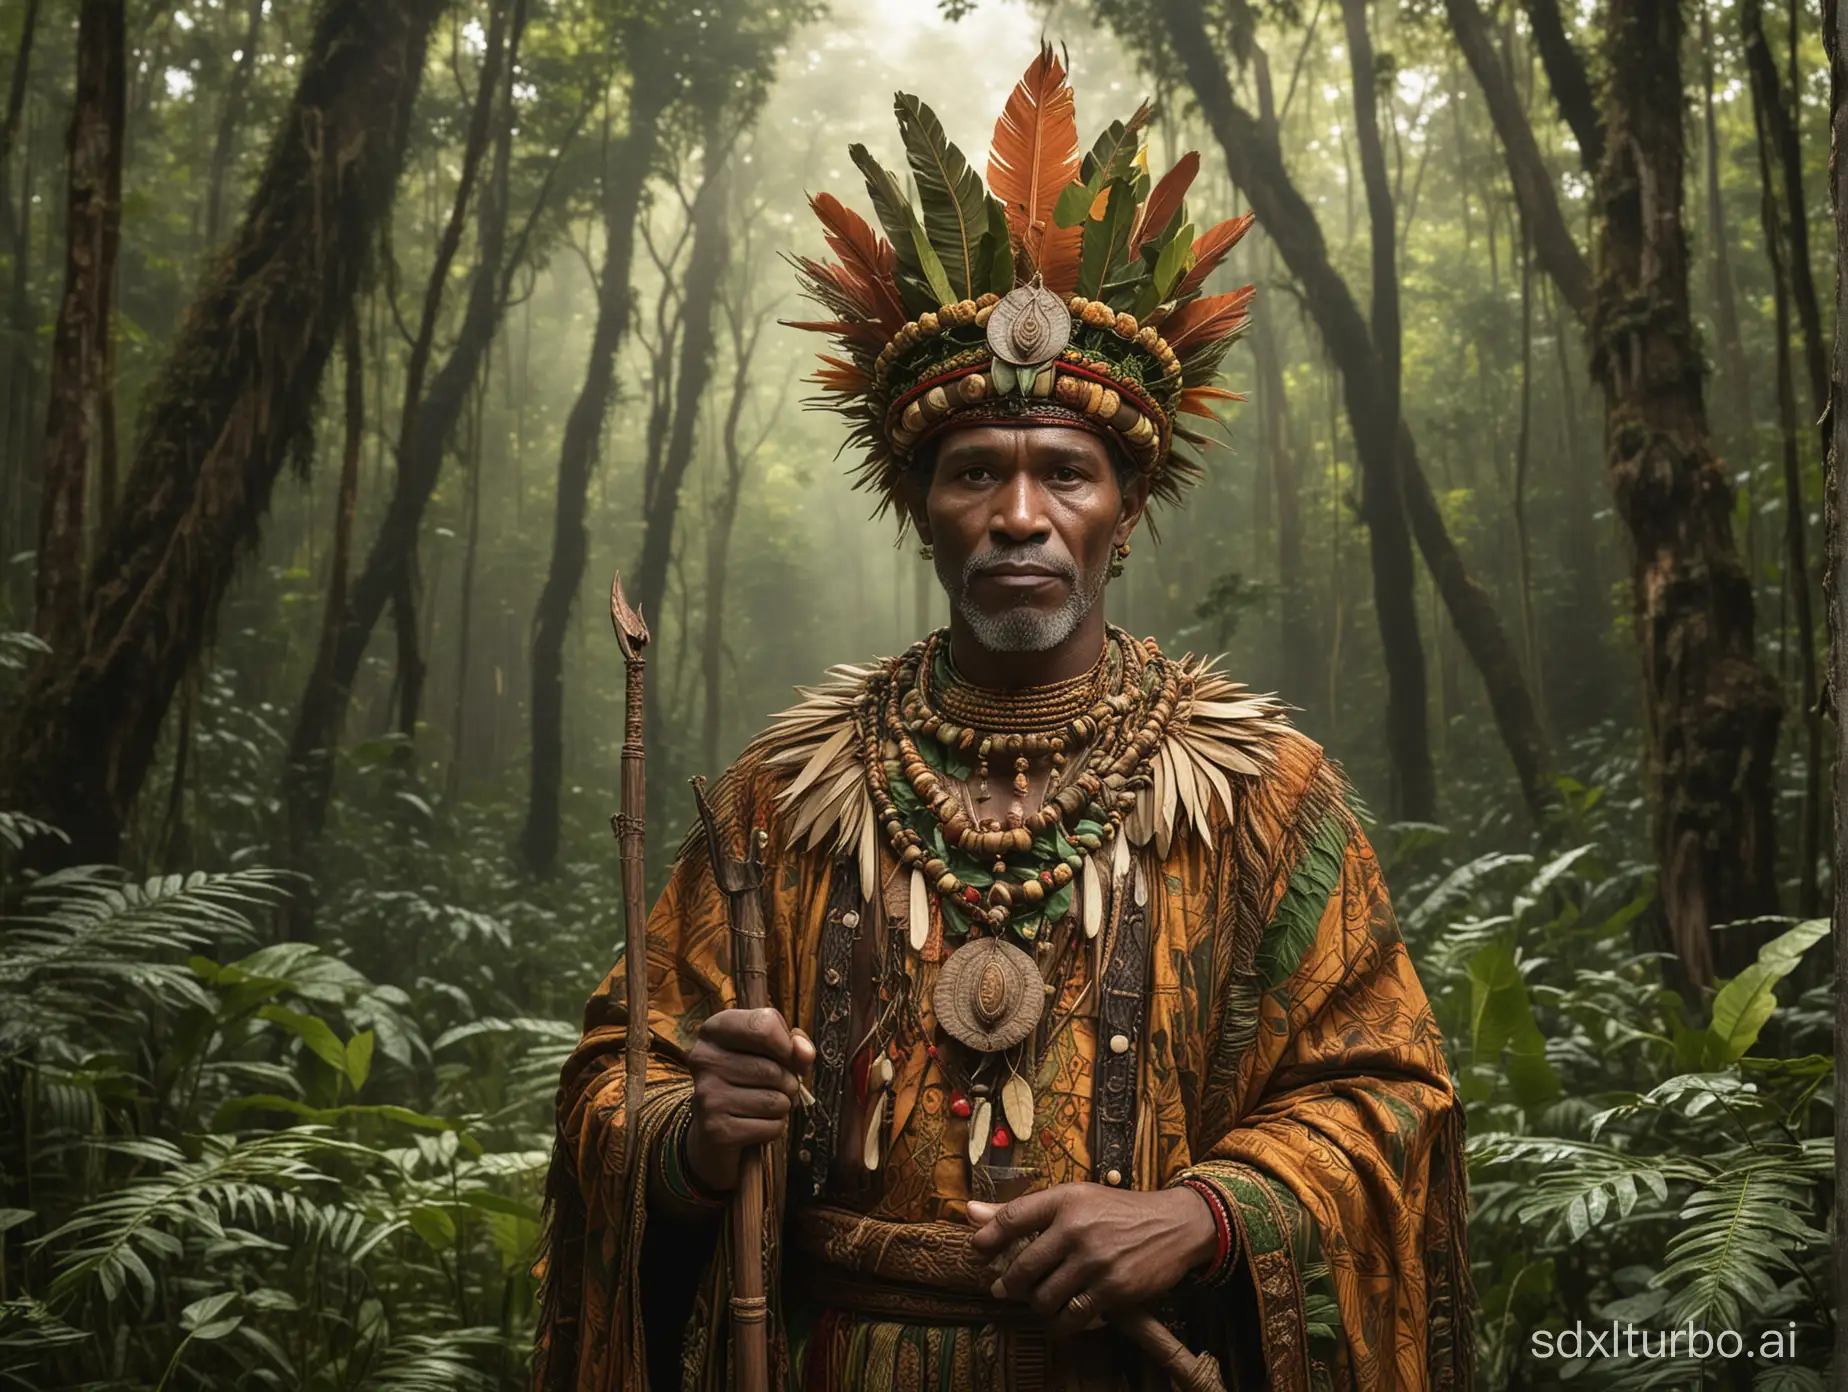 A captivating illustration of a Quilombola king, Malunguinho, standing tall as the guardian of the forests and the catimbó of jurema. He is adorned in traditional Quilombola attire, with a crown of leaves and a necklace made of natural elements. In one hand, he holds a staff made of wood while the other rests on a ceremonial pot filled with the sacred jurema drink. The background reveals lush, enchanted forests with animals and spirits blending harmoniously. The overall atmosphere of the image is mystical and respectful of the Quilombola culture and traditions.